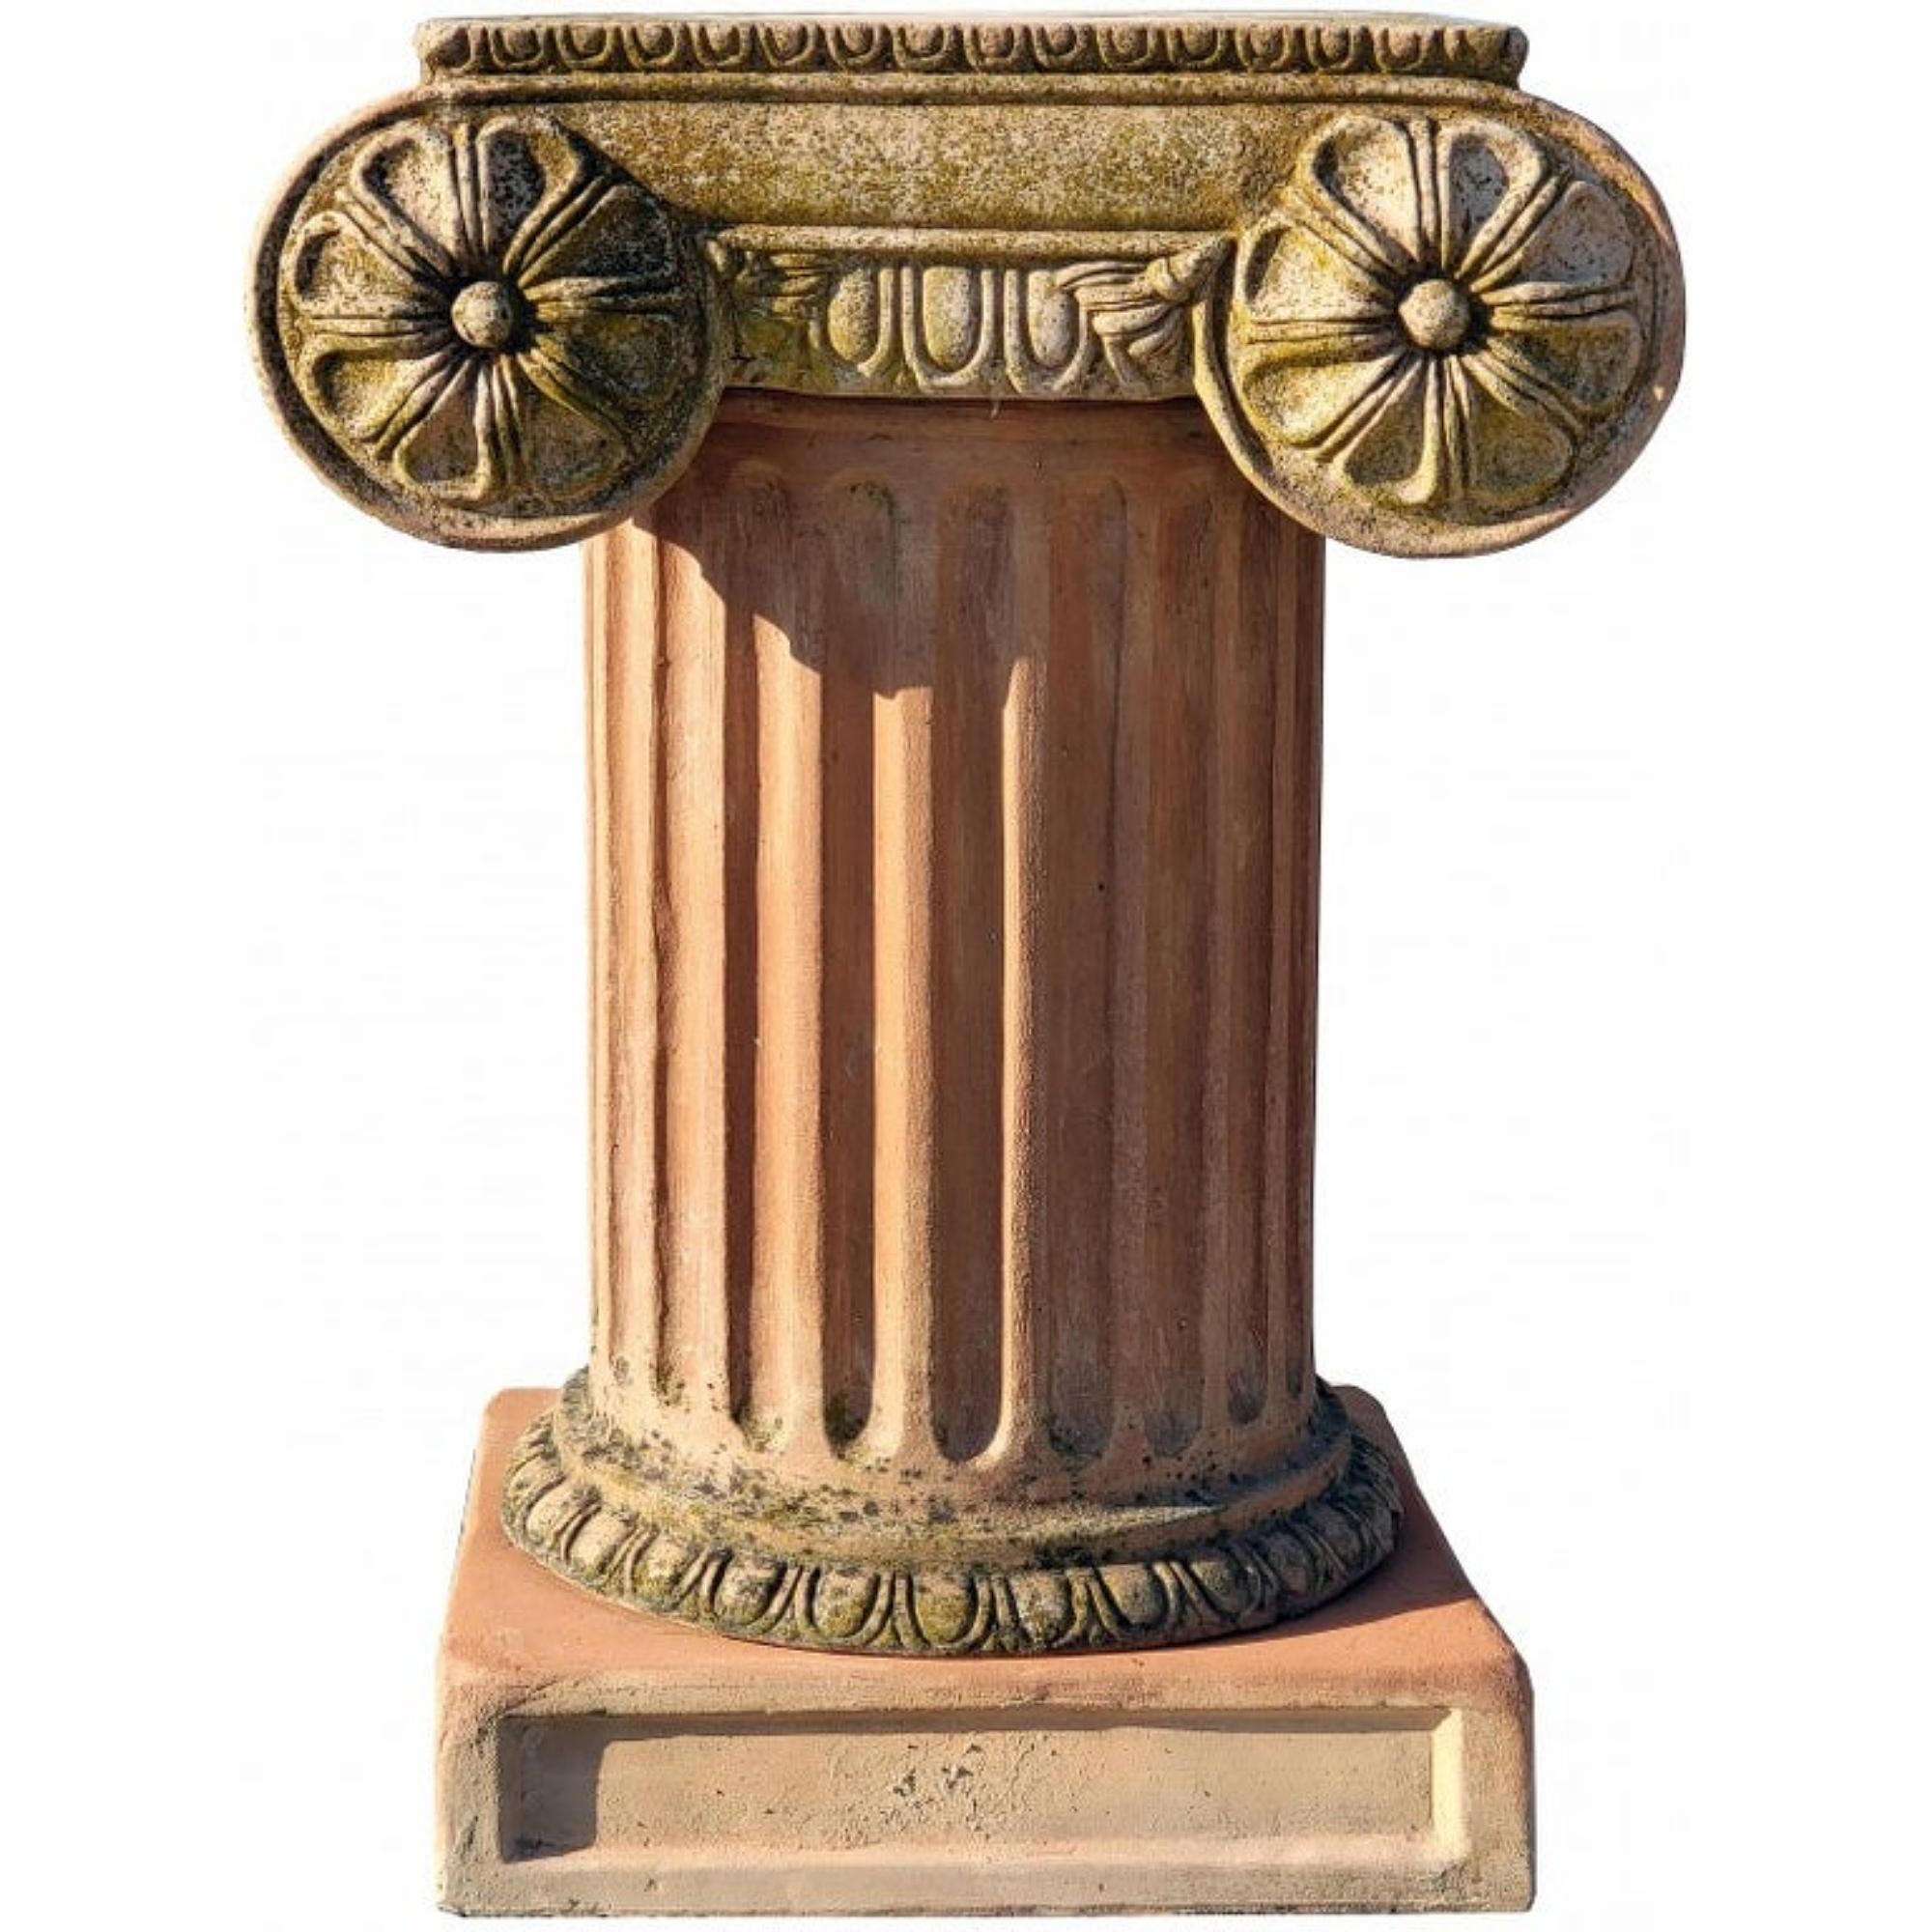 Column medium ionic order H71 cm terracotta busts base support
early 20th century

Beautiful column in Ionic order H 71 cm. 
Base for busts, sculptures and ornamental vases.

Measures: height 71 cm
width 40 cm
depth 55 cm
weight 20 kg
base